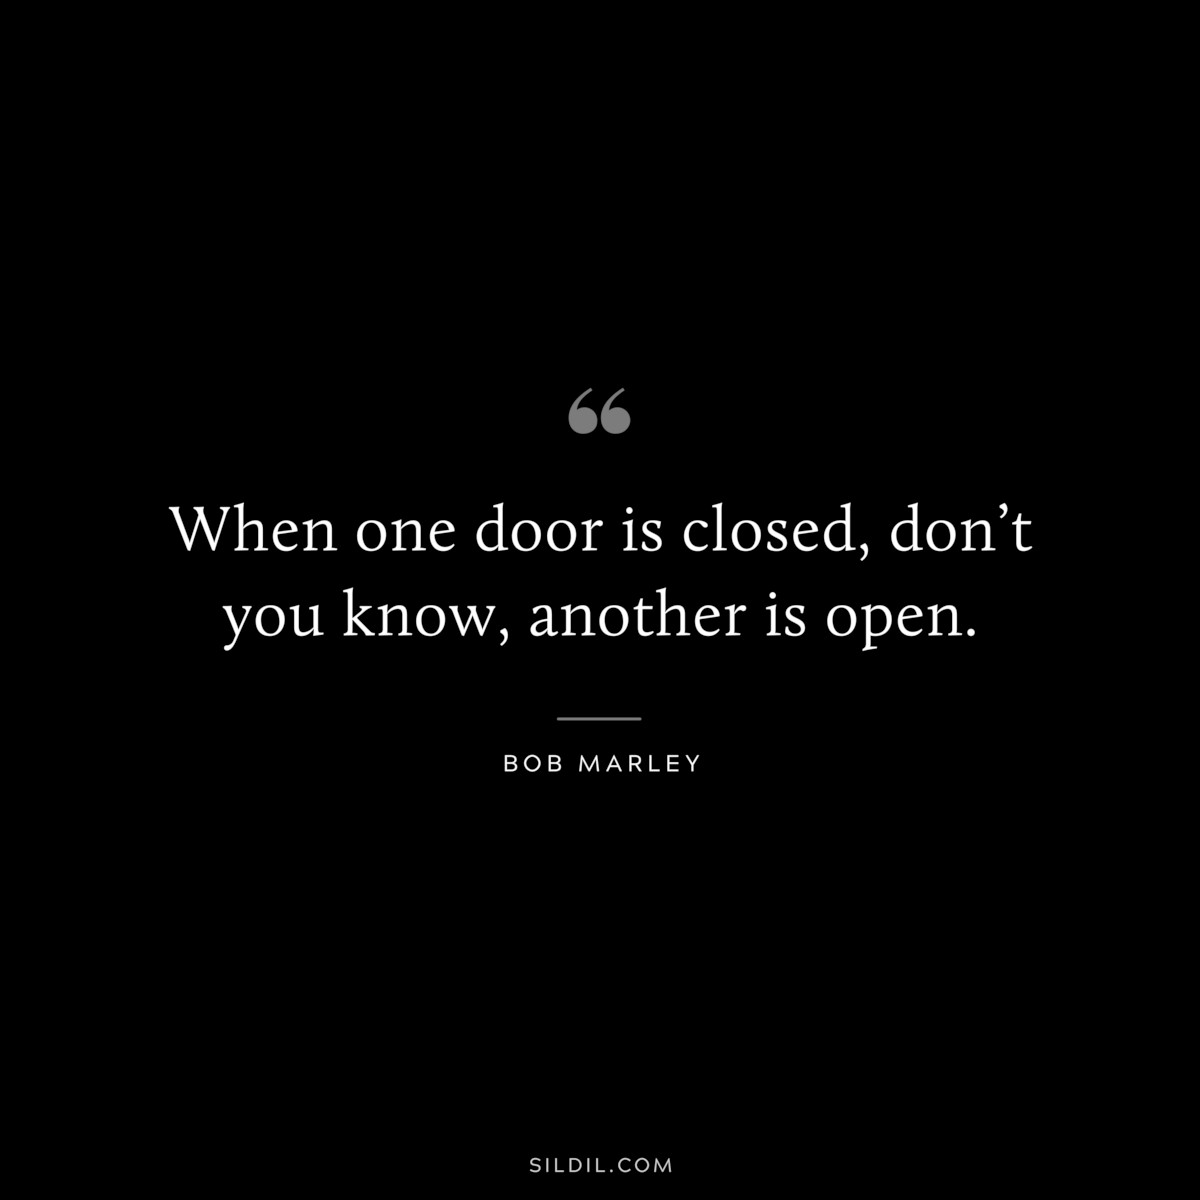 When one door is closed, don’t you know, another is open. ― Bob Marley